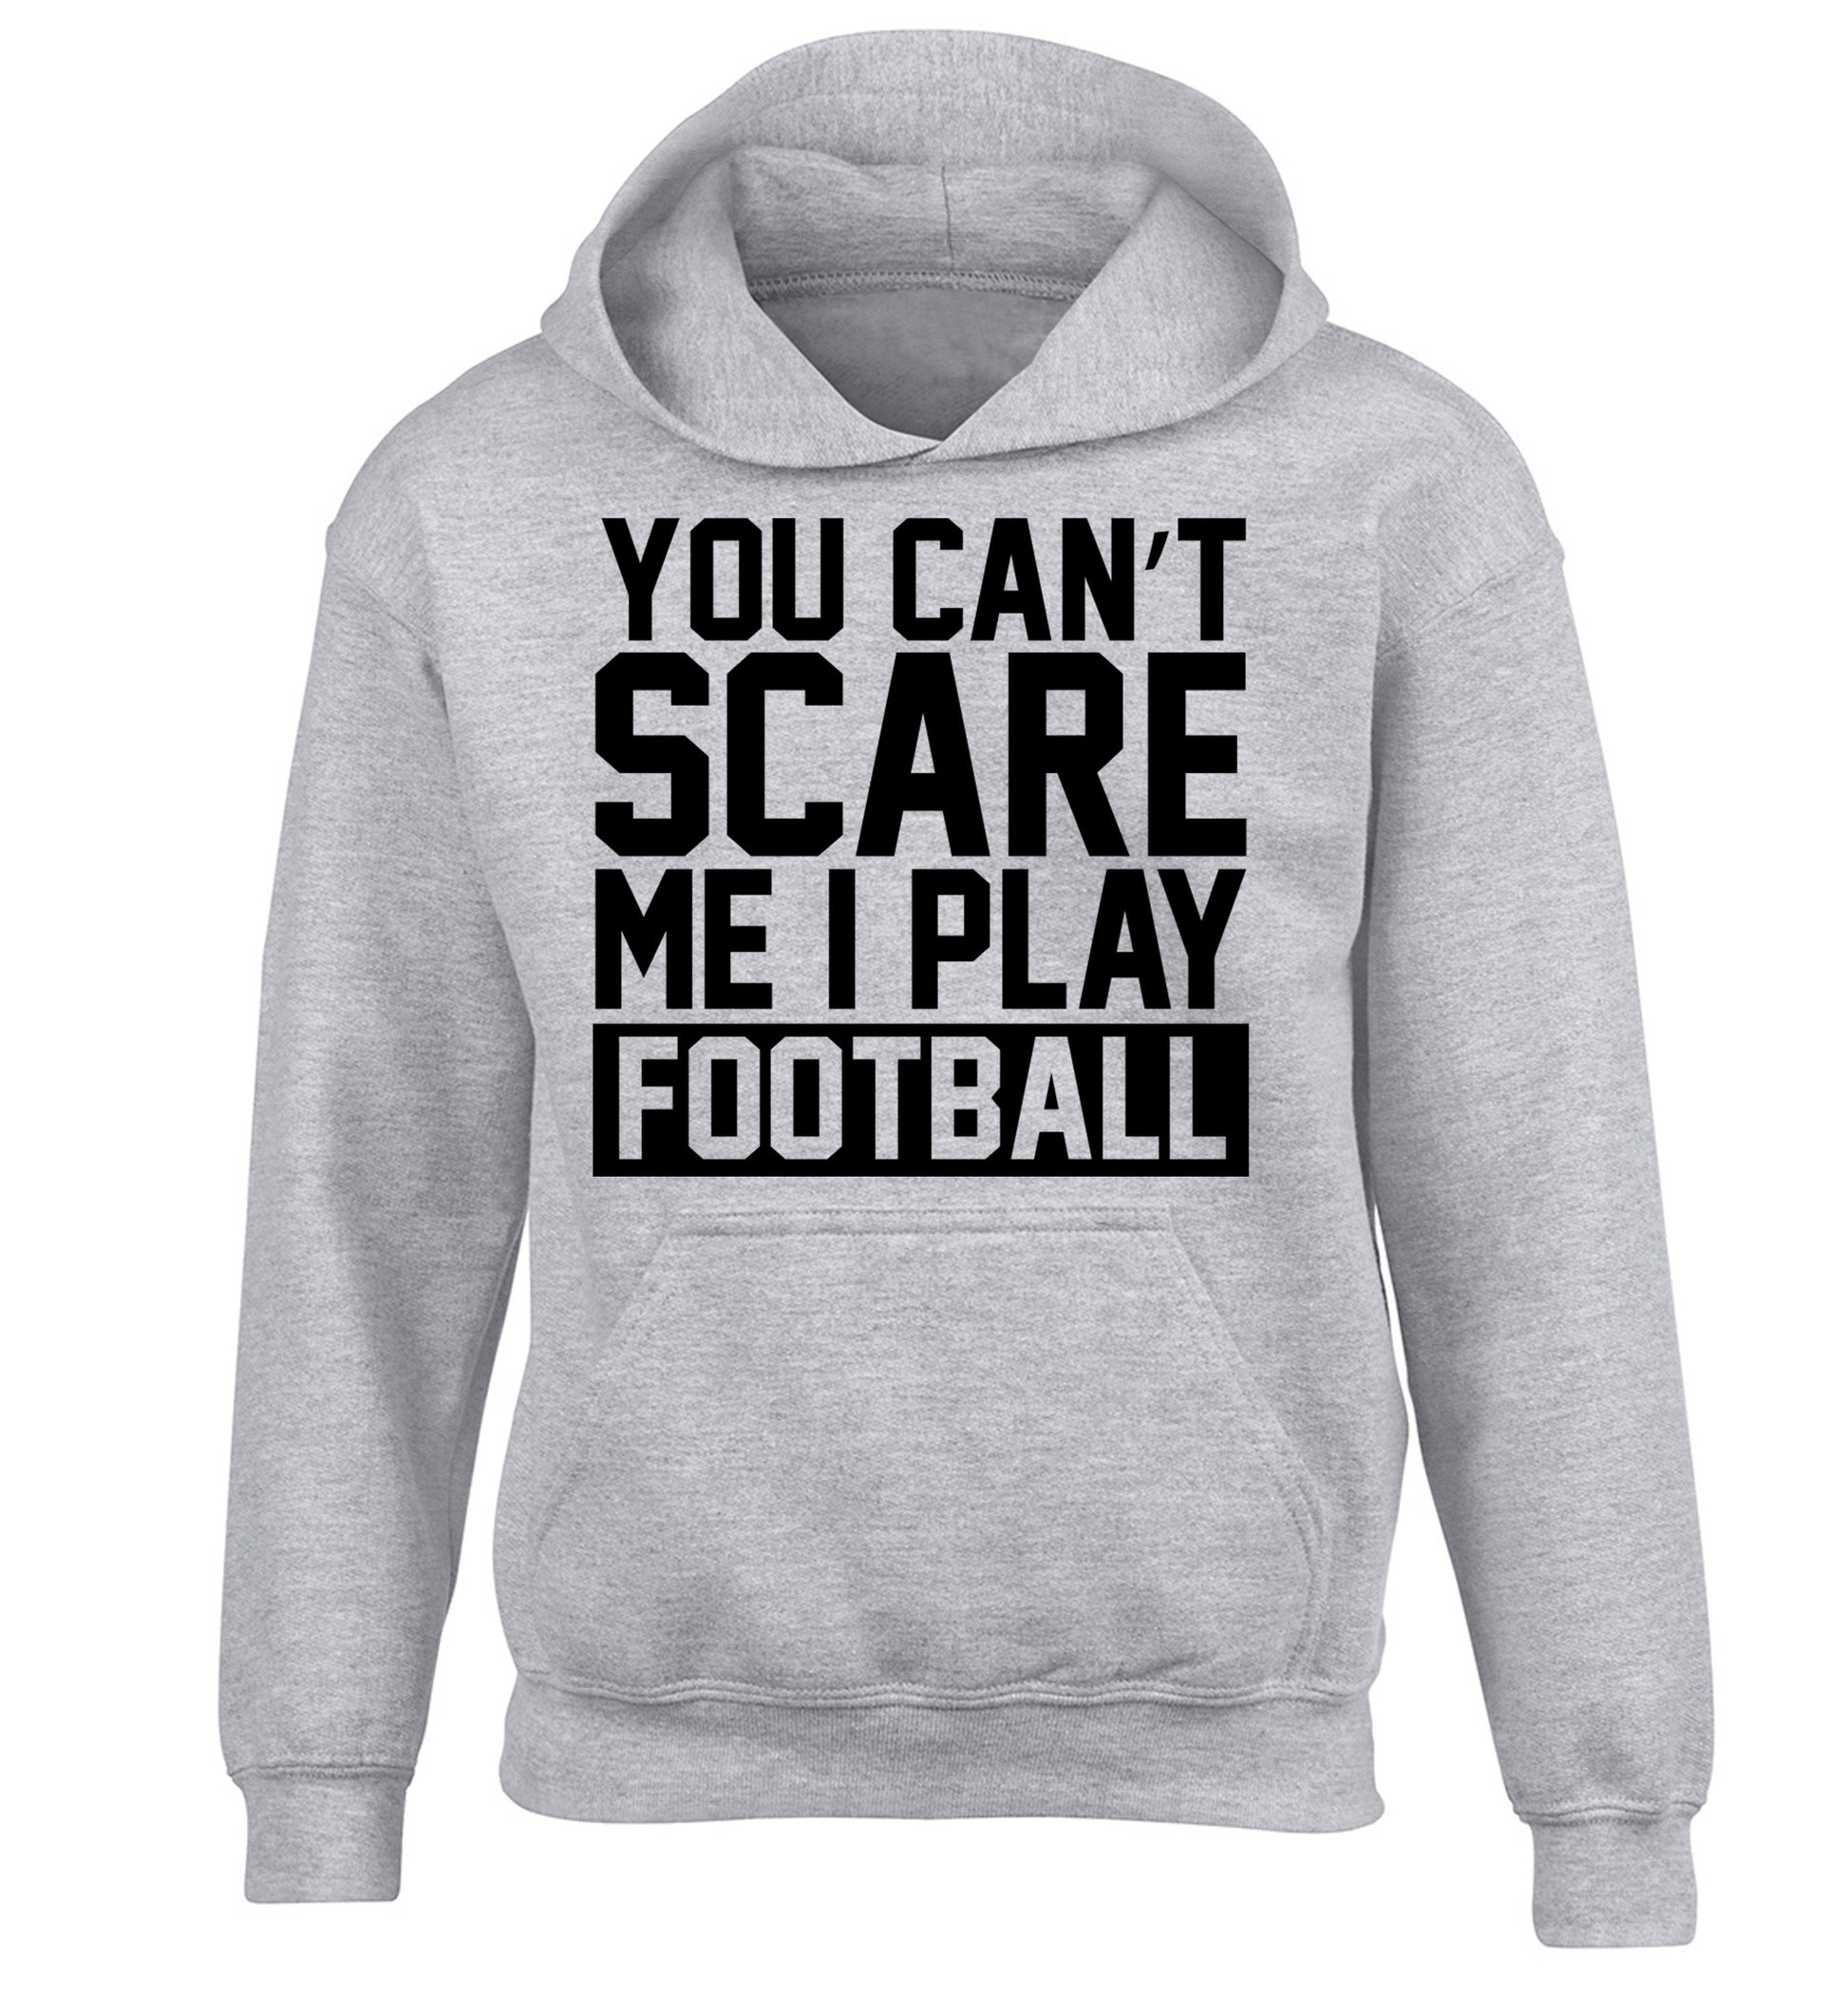 You can't scare me I play football children's grey hoodie 12-14 Years